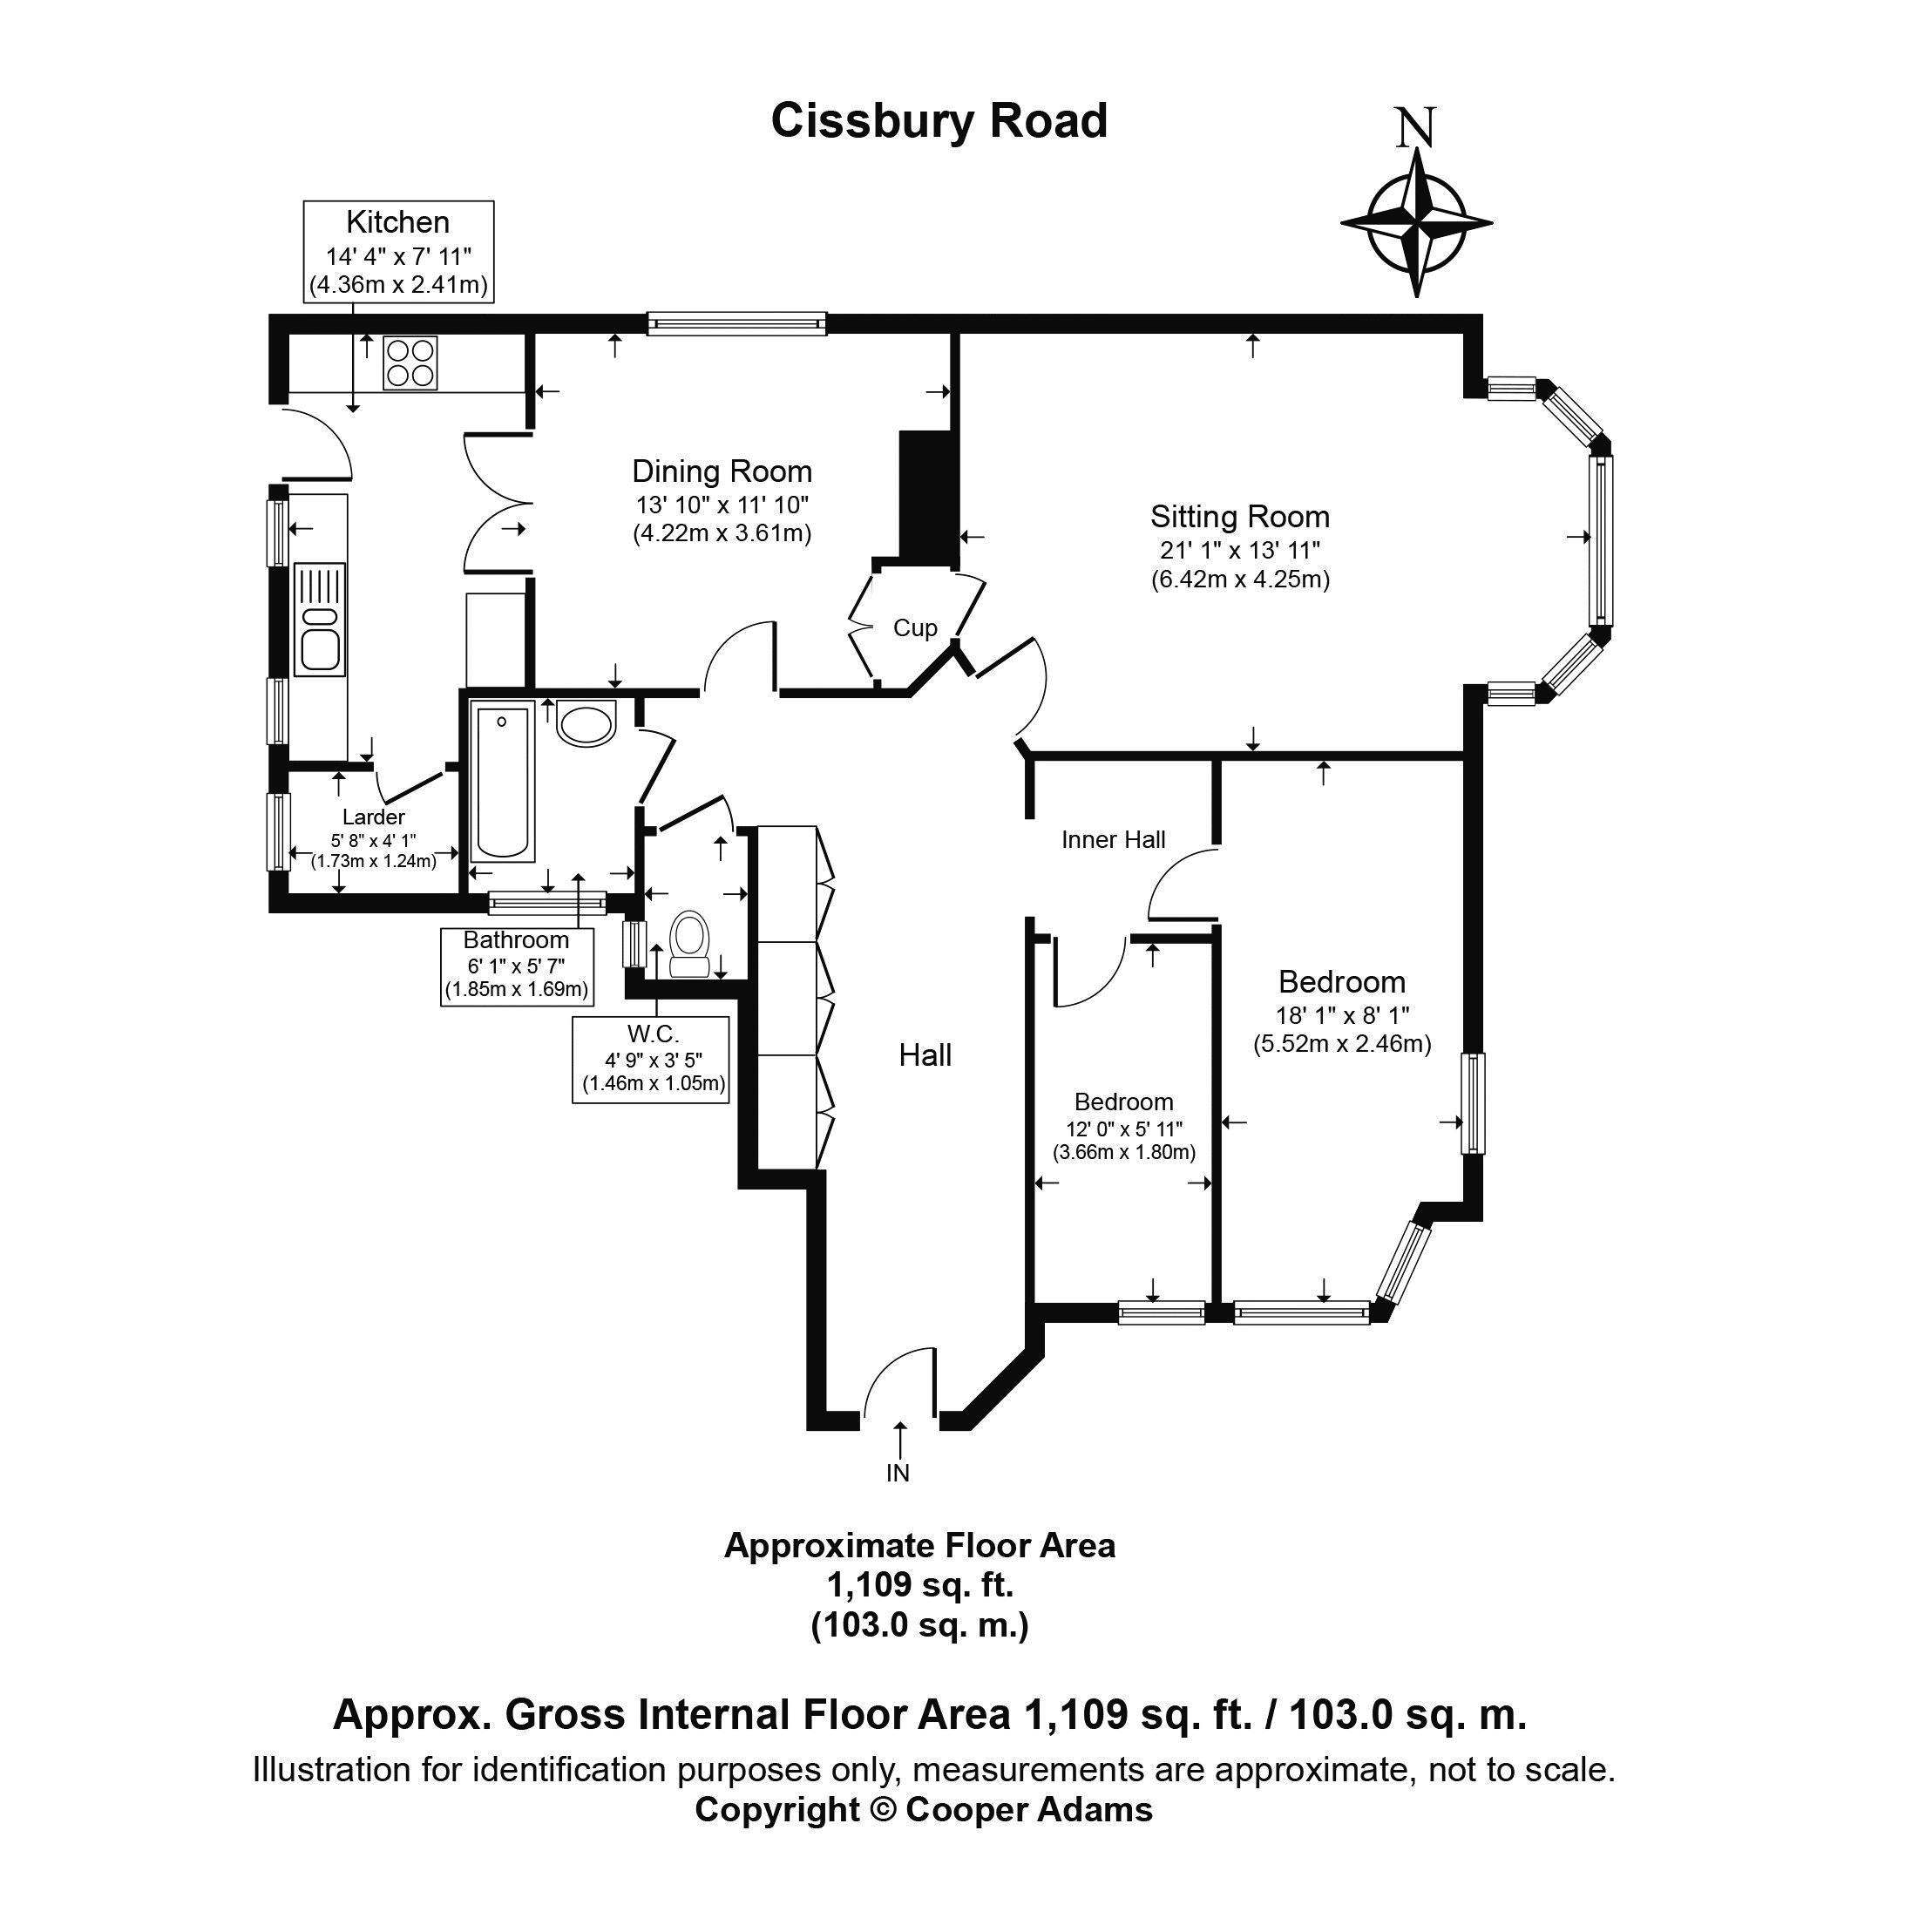 2 bed apartment to rent in Cissbury Road, Worthing - Property floorplan